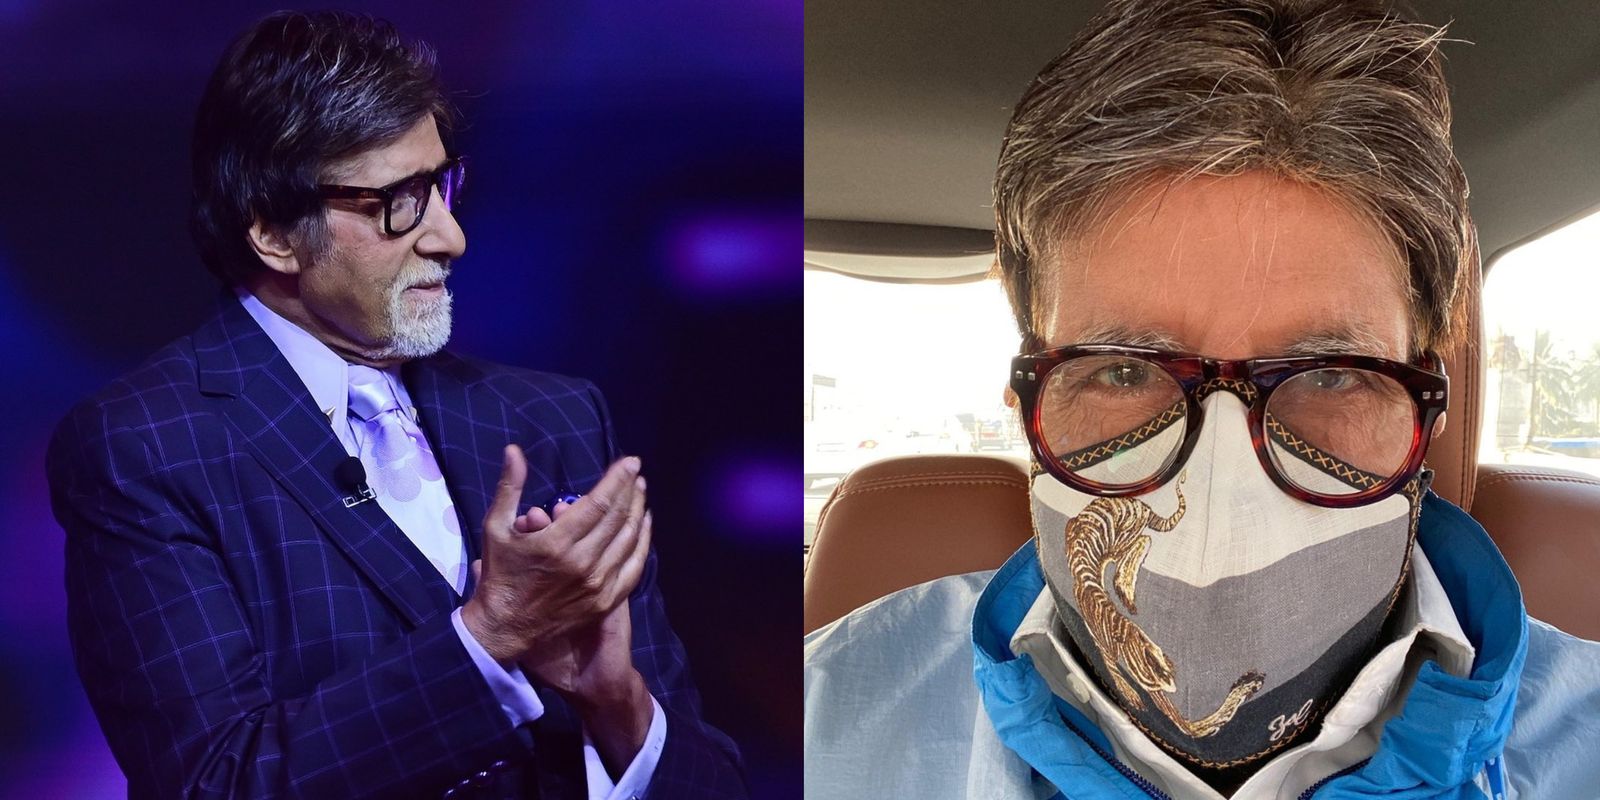 Amitabh Bachchan Shares A Selfie Along With Solid Monday Motivation; Says ‘Stay Safe Everyone’